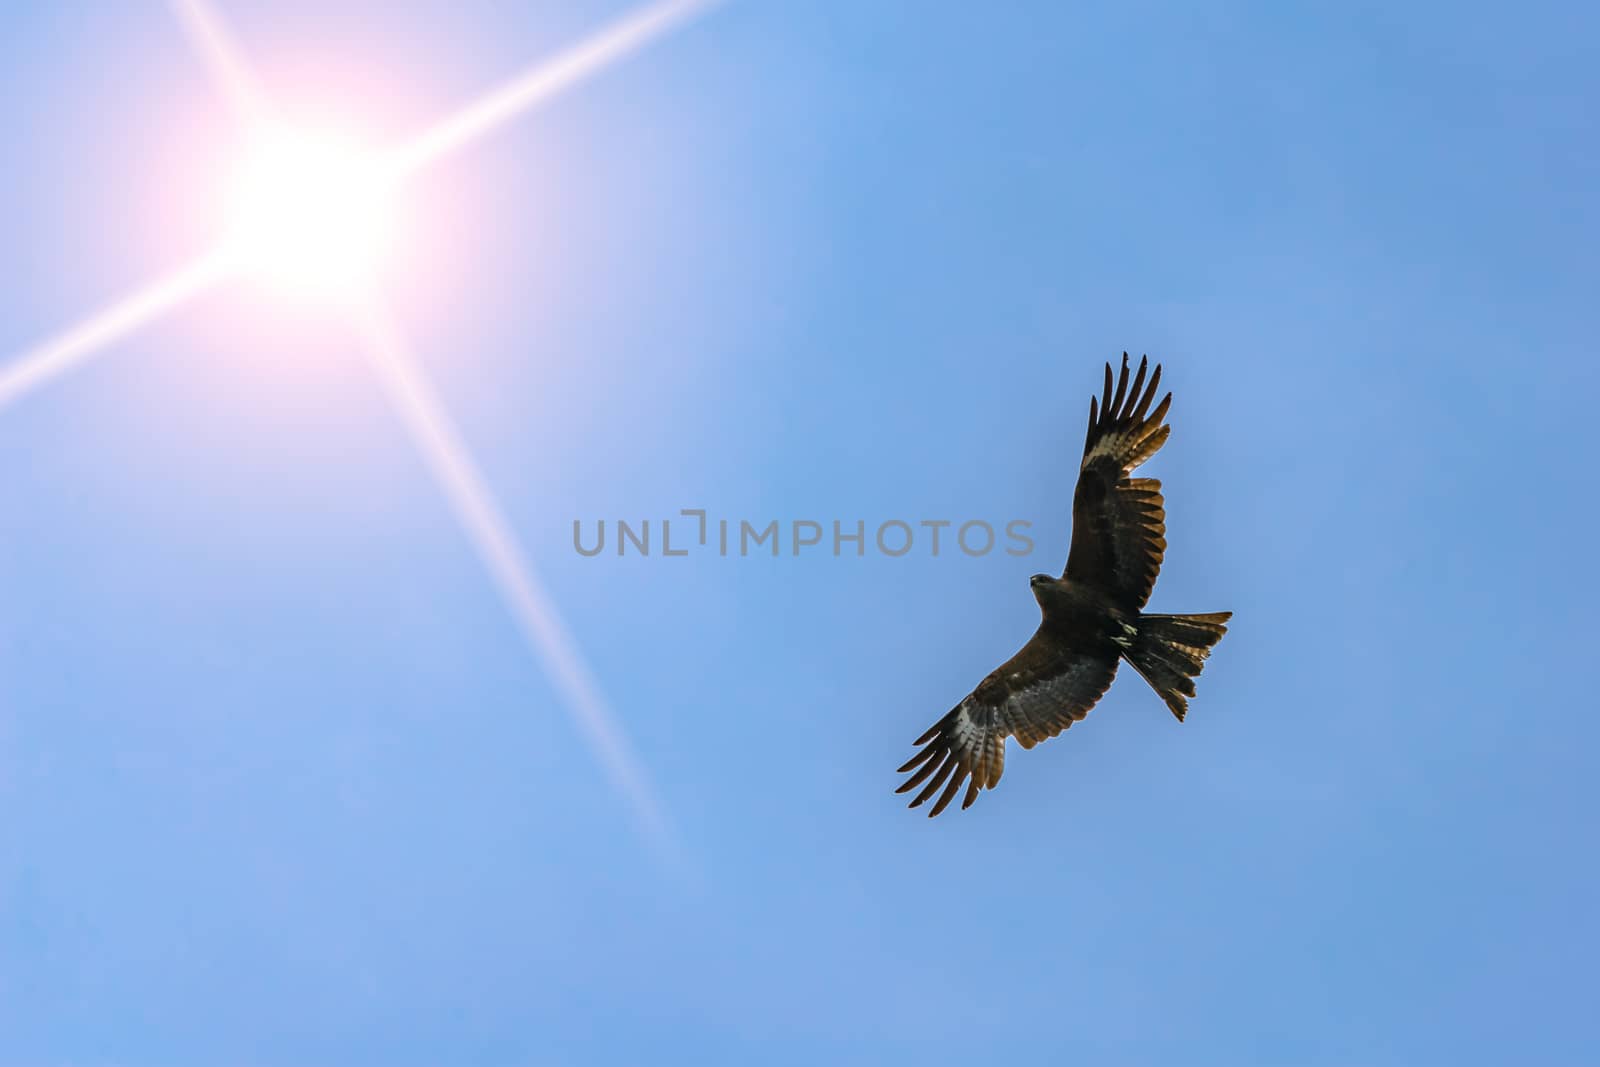 Desert eagle soars in the sky against the background of a clear sky and a bright sun in search of prey